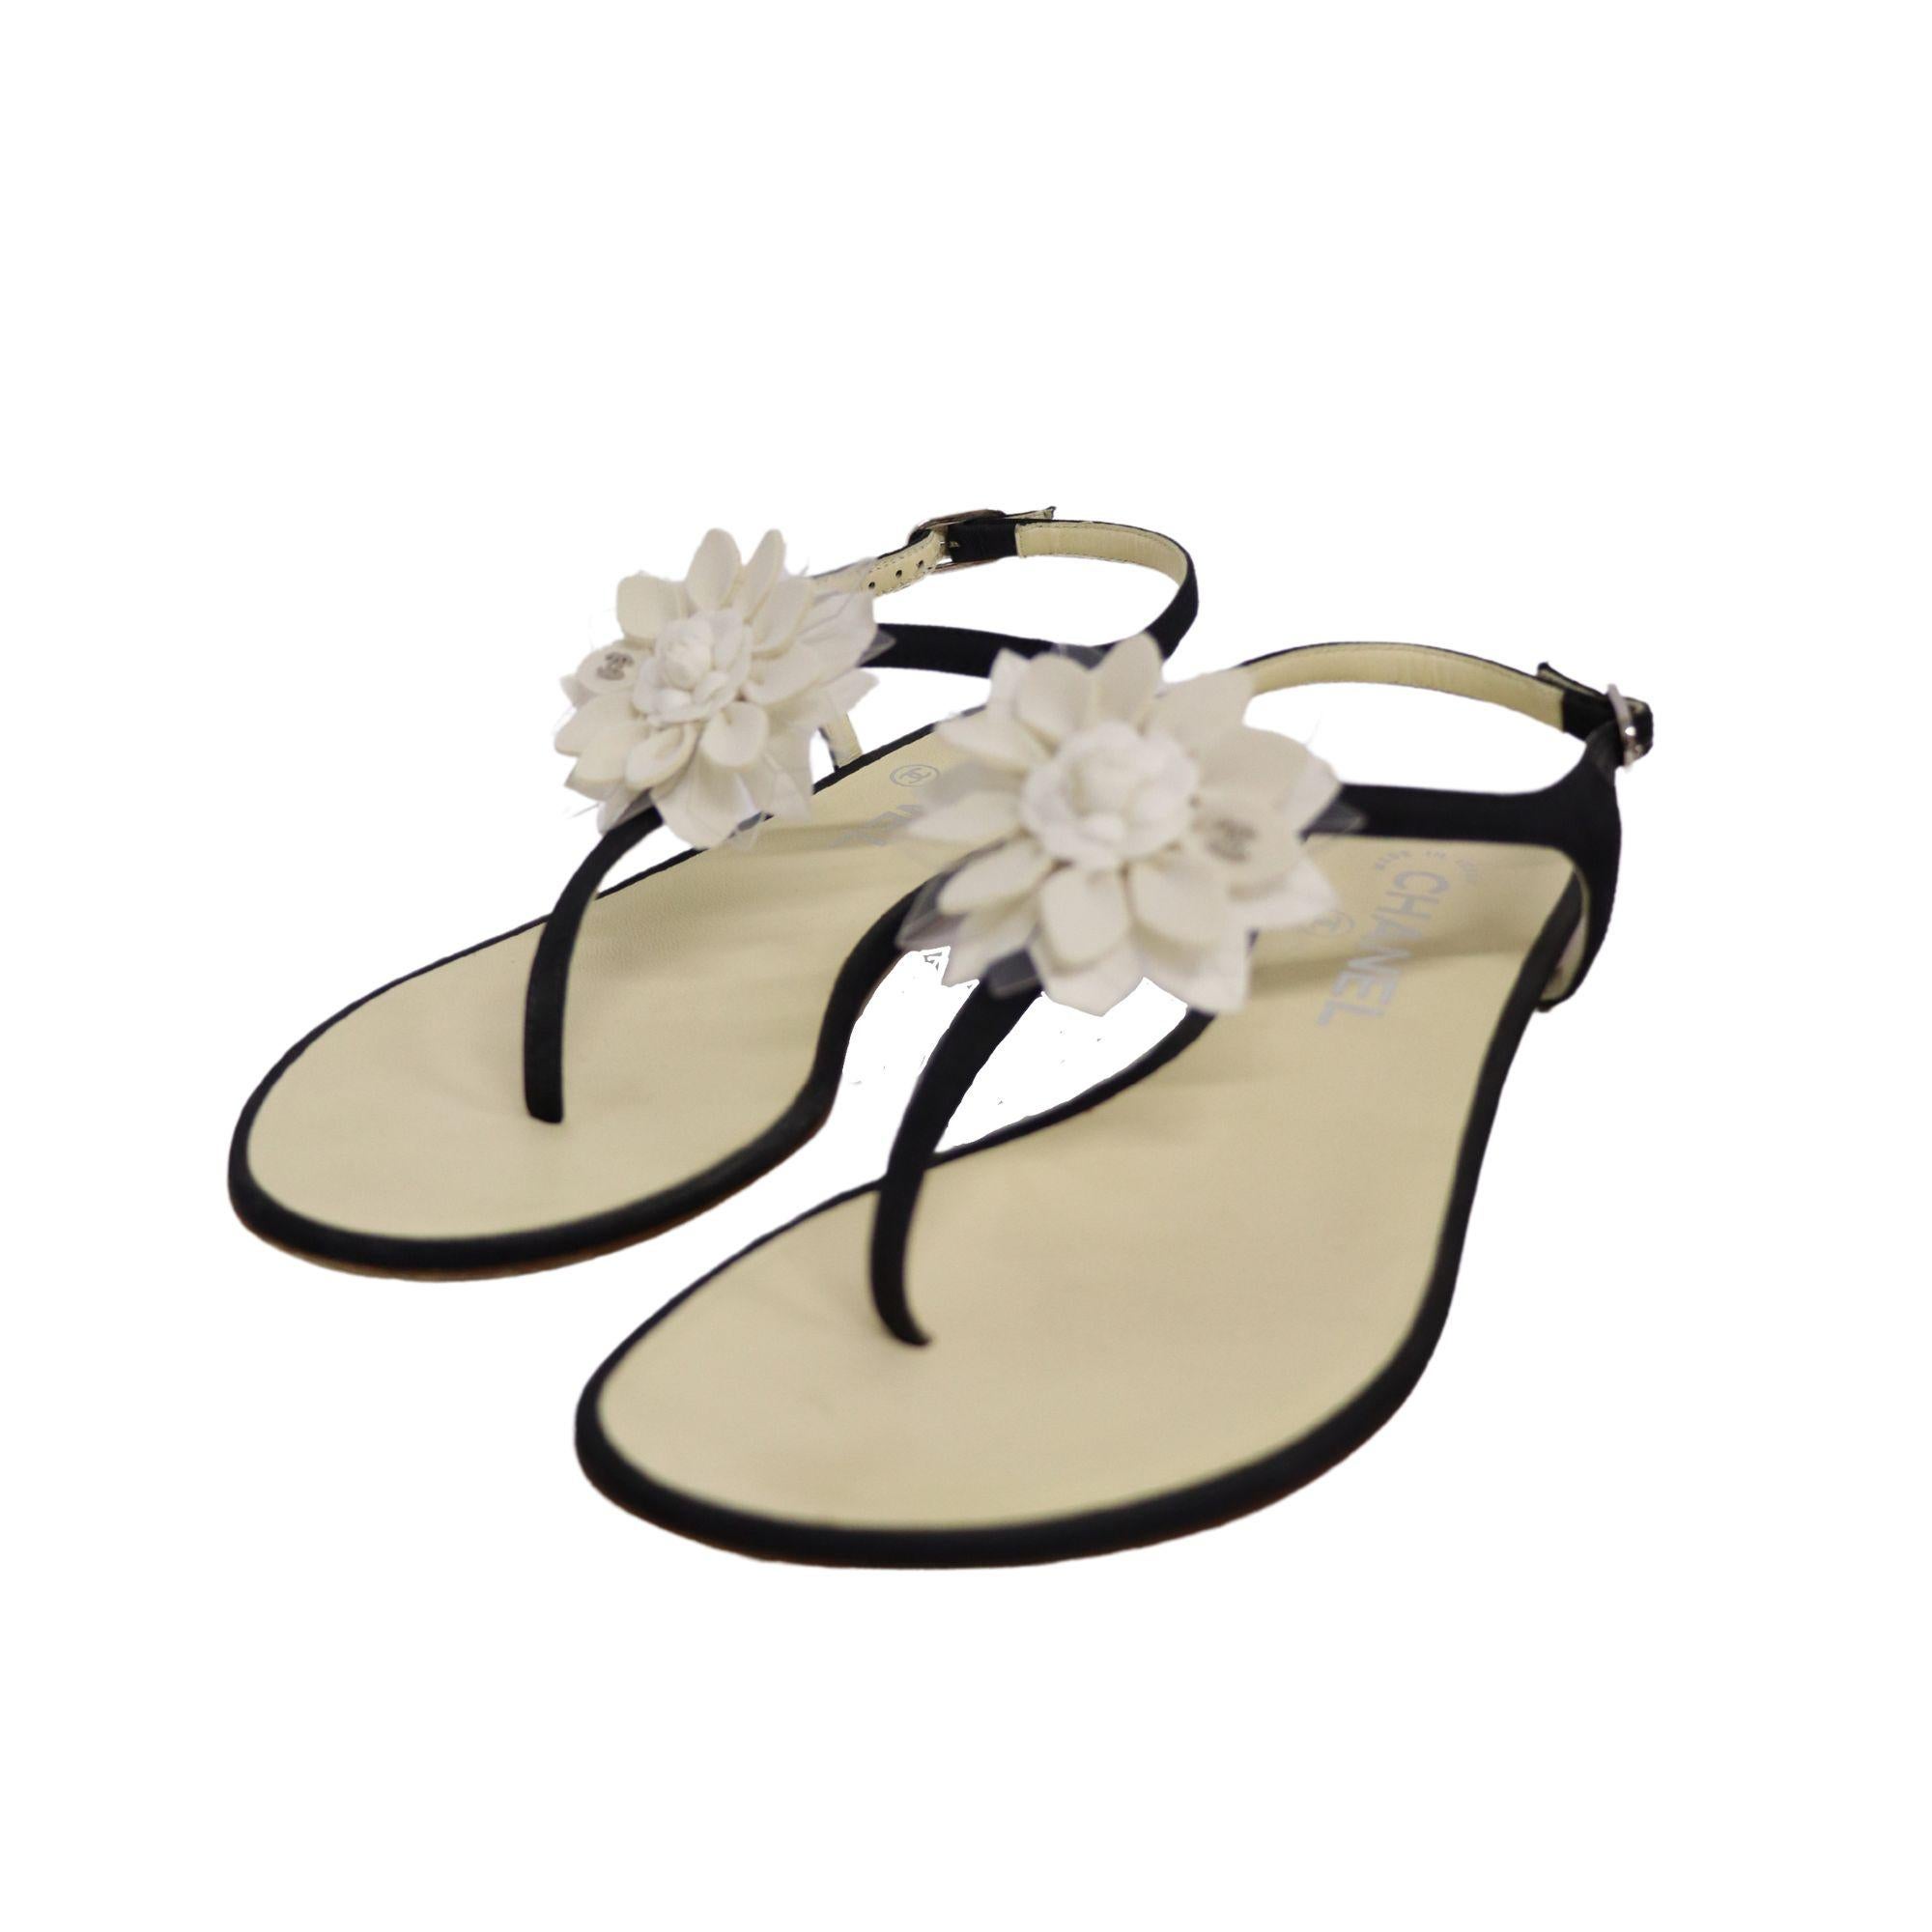 Black and white Chanel sandal with with 3D flower detail and the signature camellia in the middle. In excellent condition.

Material: Textile
Size: EU 37
Overall Condition: very good
Interior Condition: Signs of wear
Exterior Condition: light marks